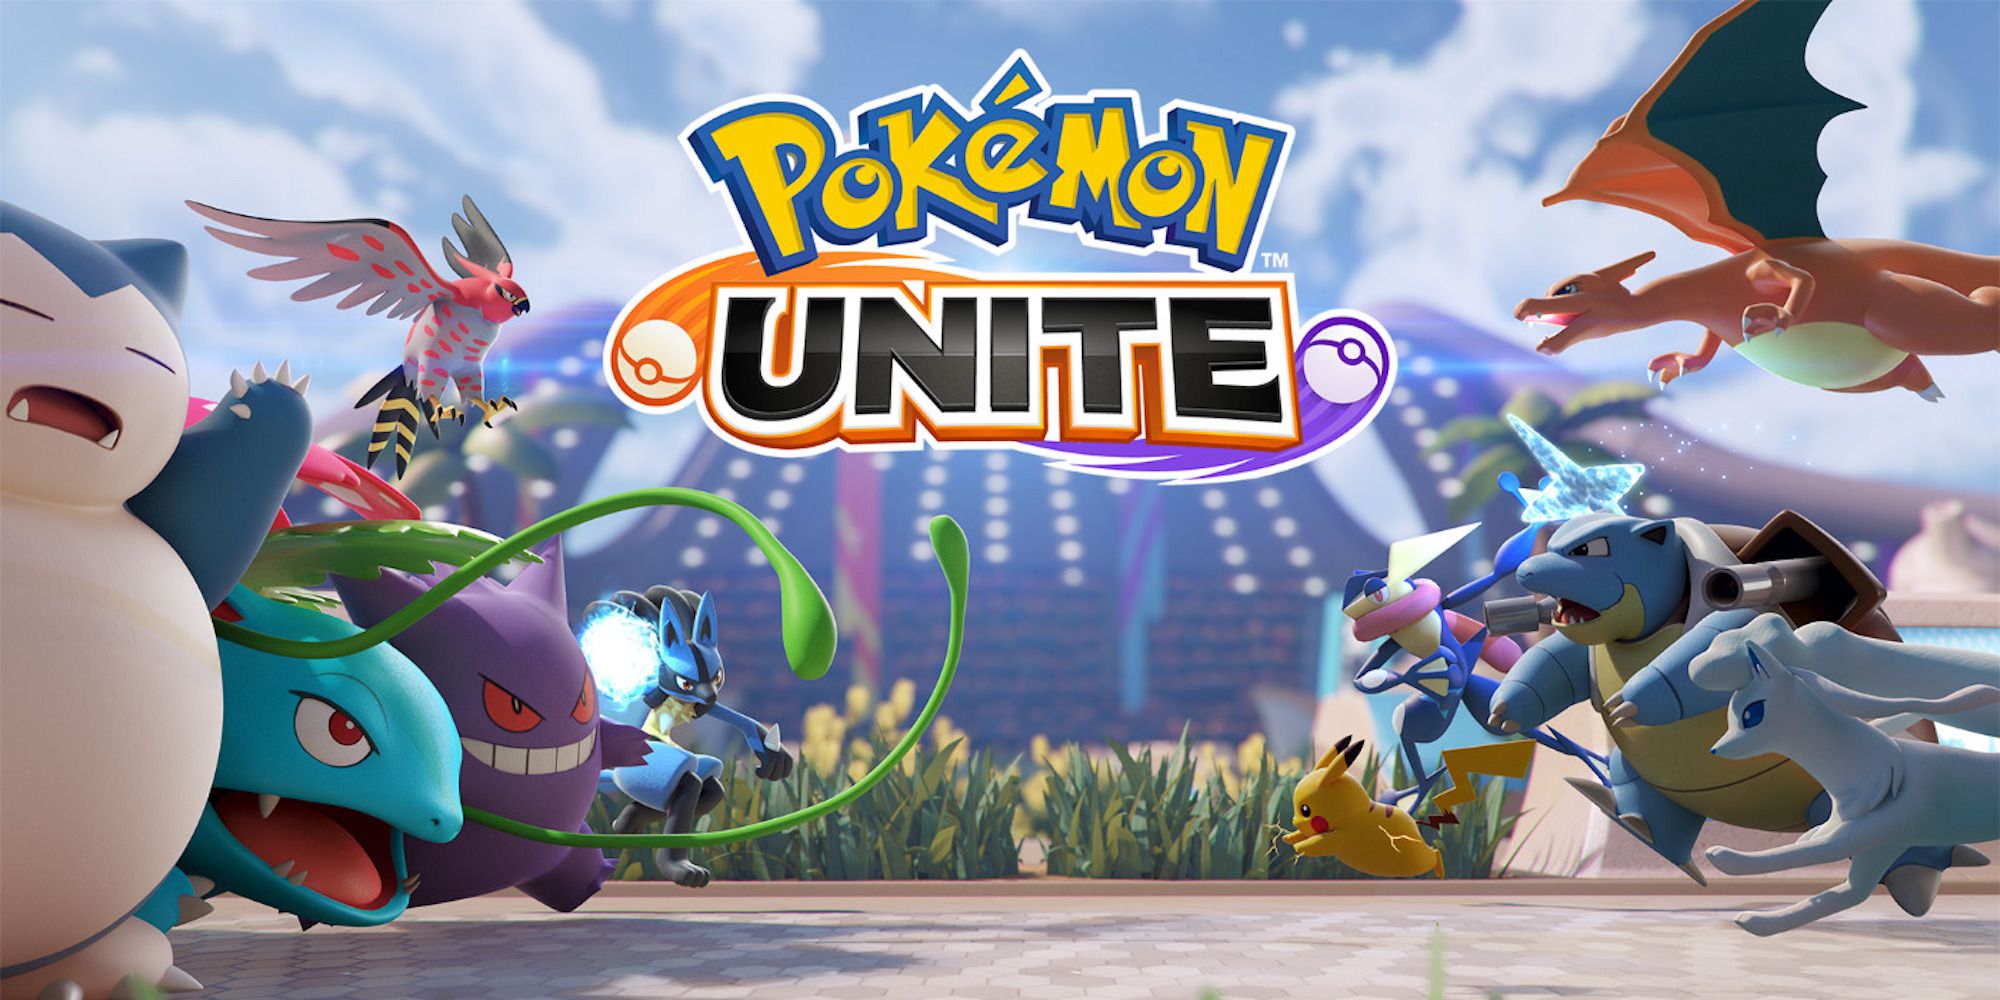 Promo art featuring characters from Pokemon Unite